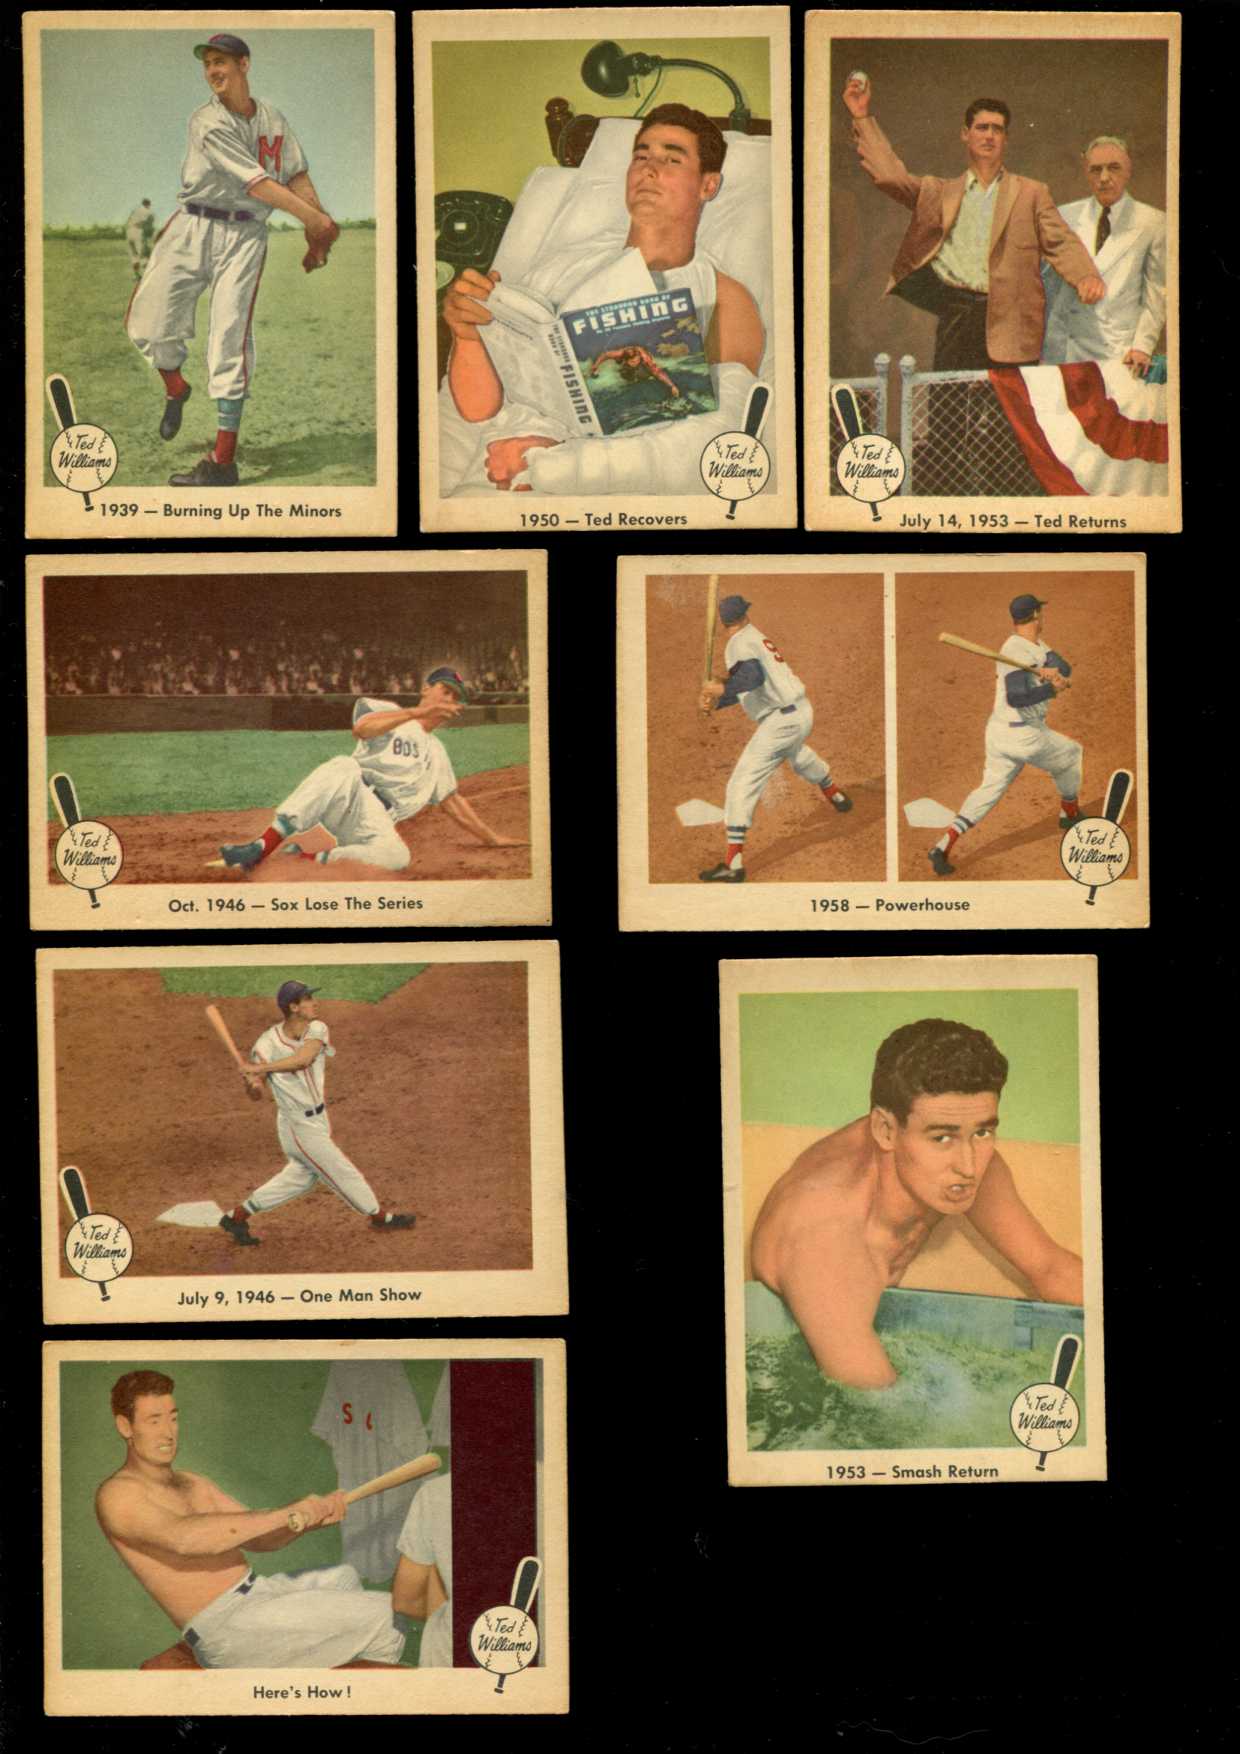 1959 Fleer Ted Williams #31 'Oct. 1946 - Sox Lose the Series' [#x] (Red Sox Baseball cards value